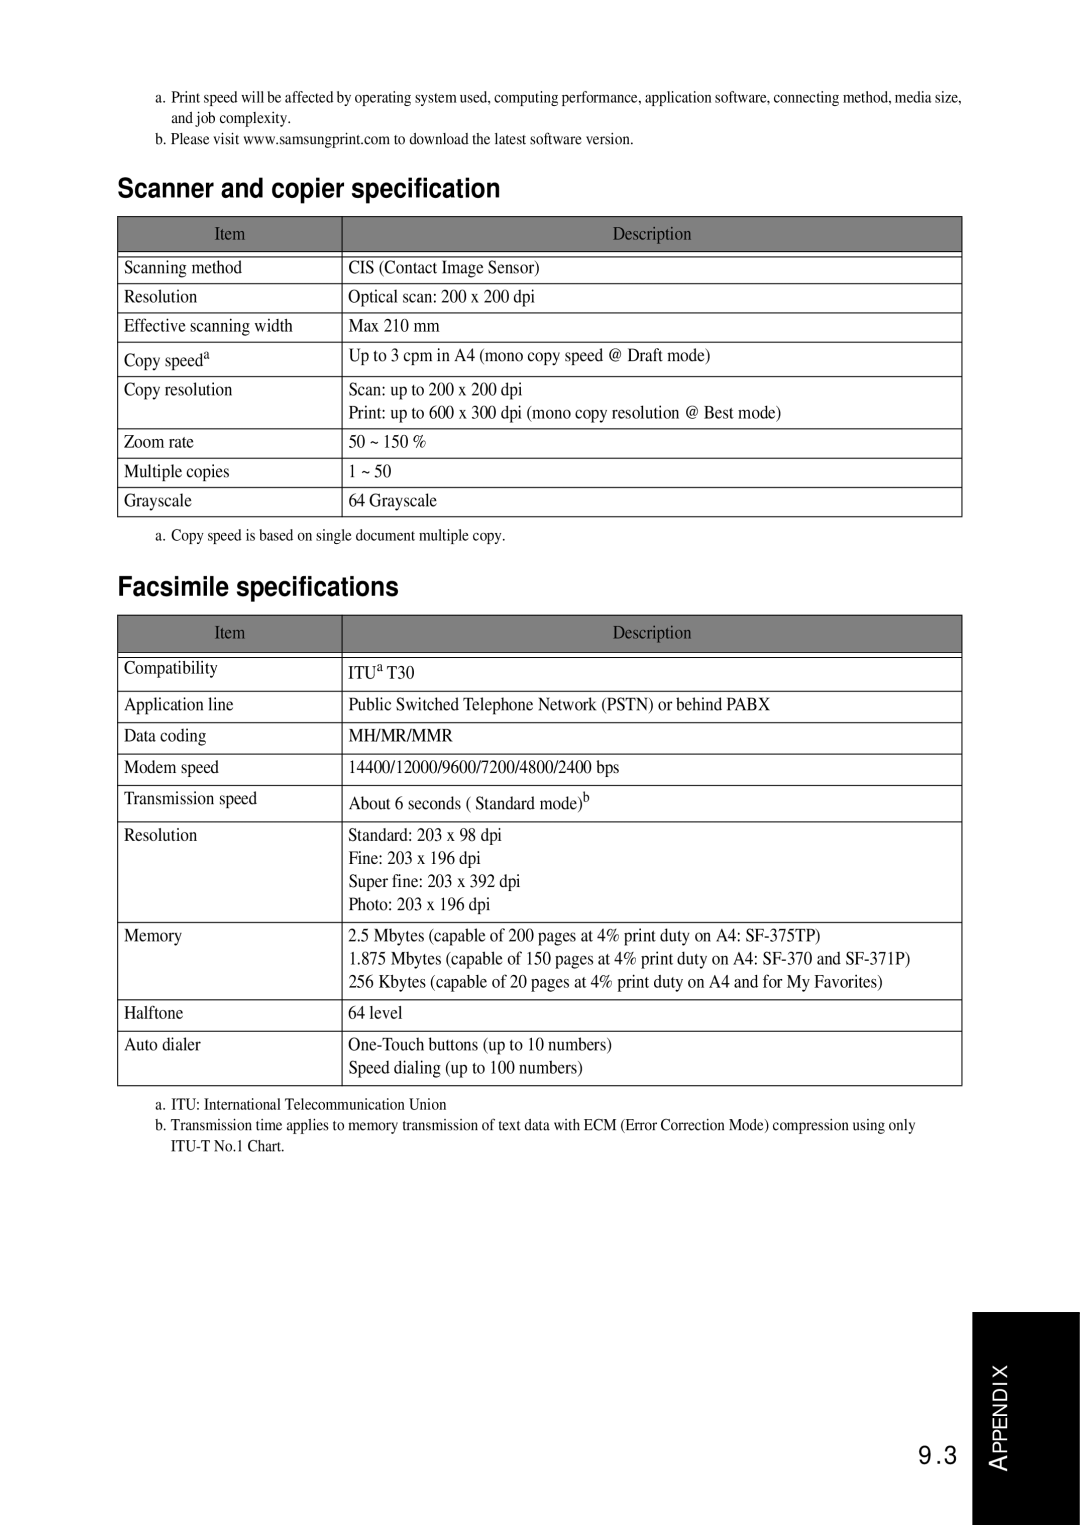 Samsung SF-370 Series manual Scanner and copier specification, Facsimile specifications 